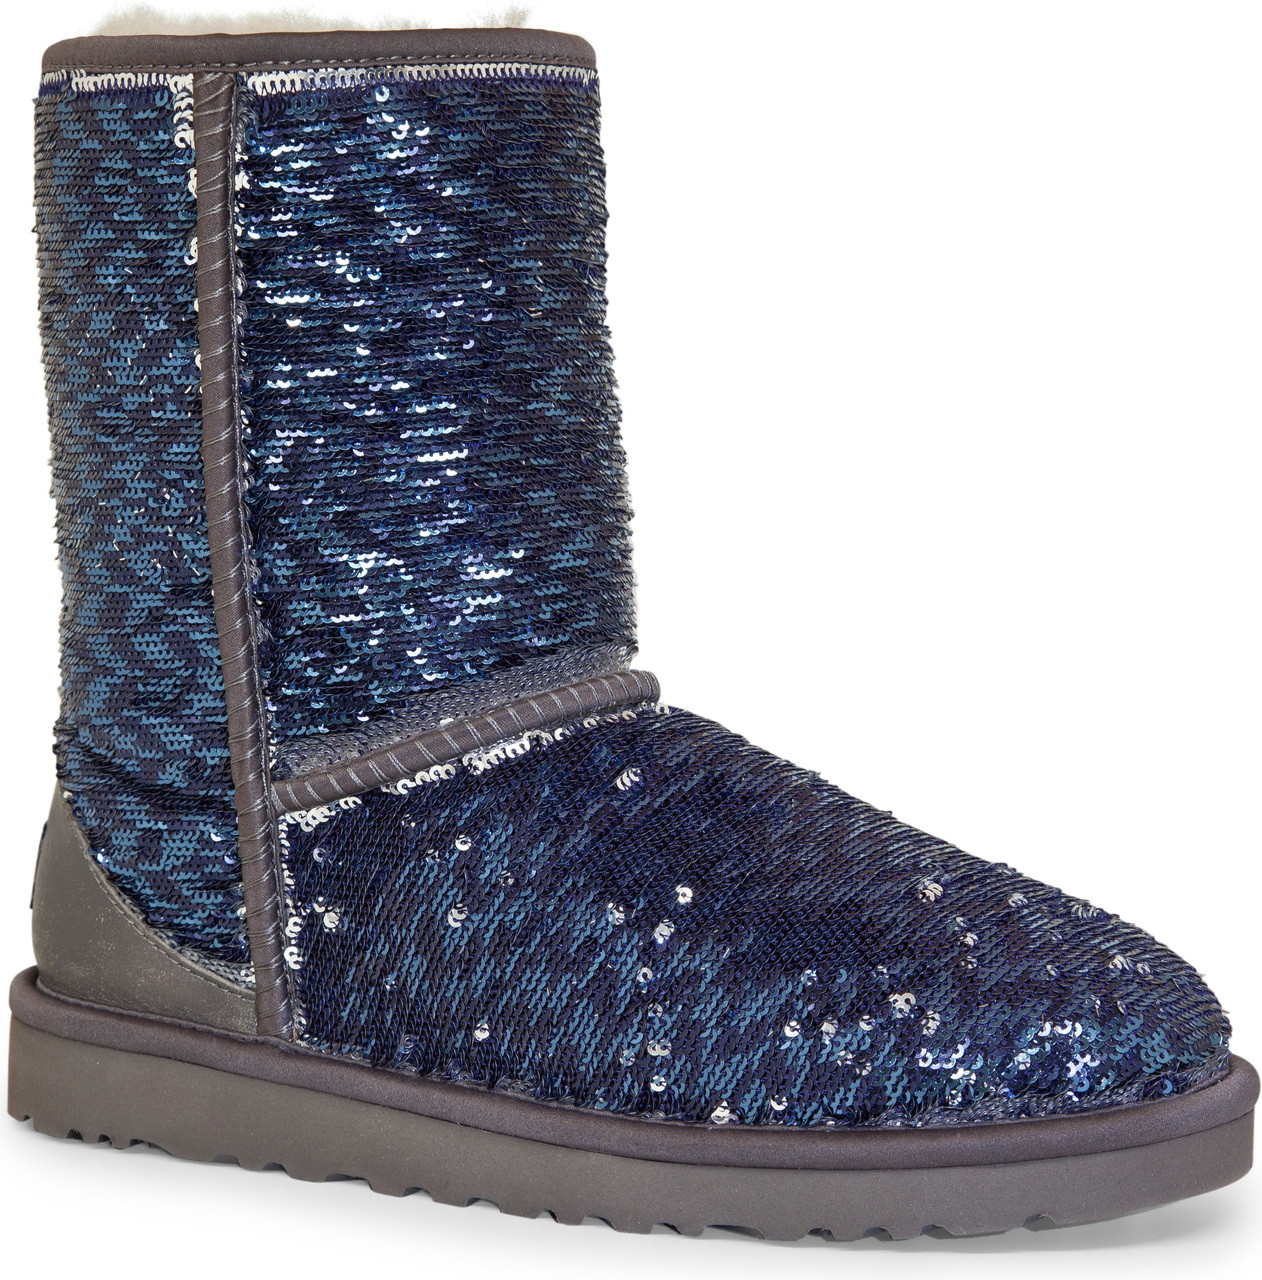 blue sequin ugg boots off 59% - www 